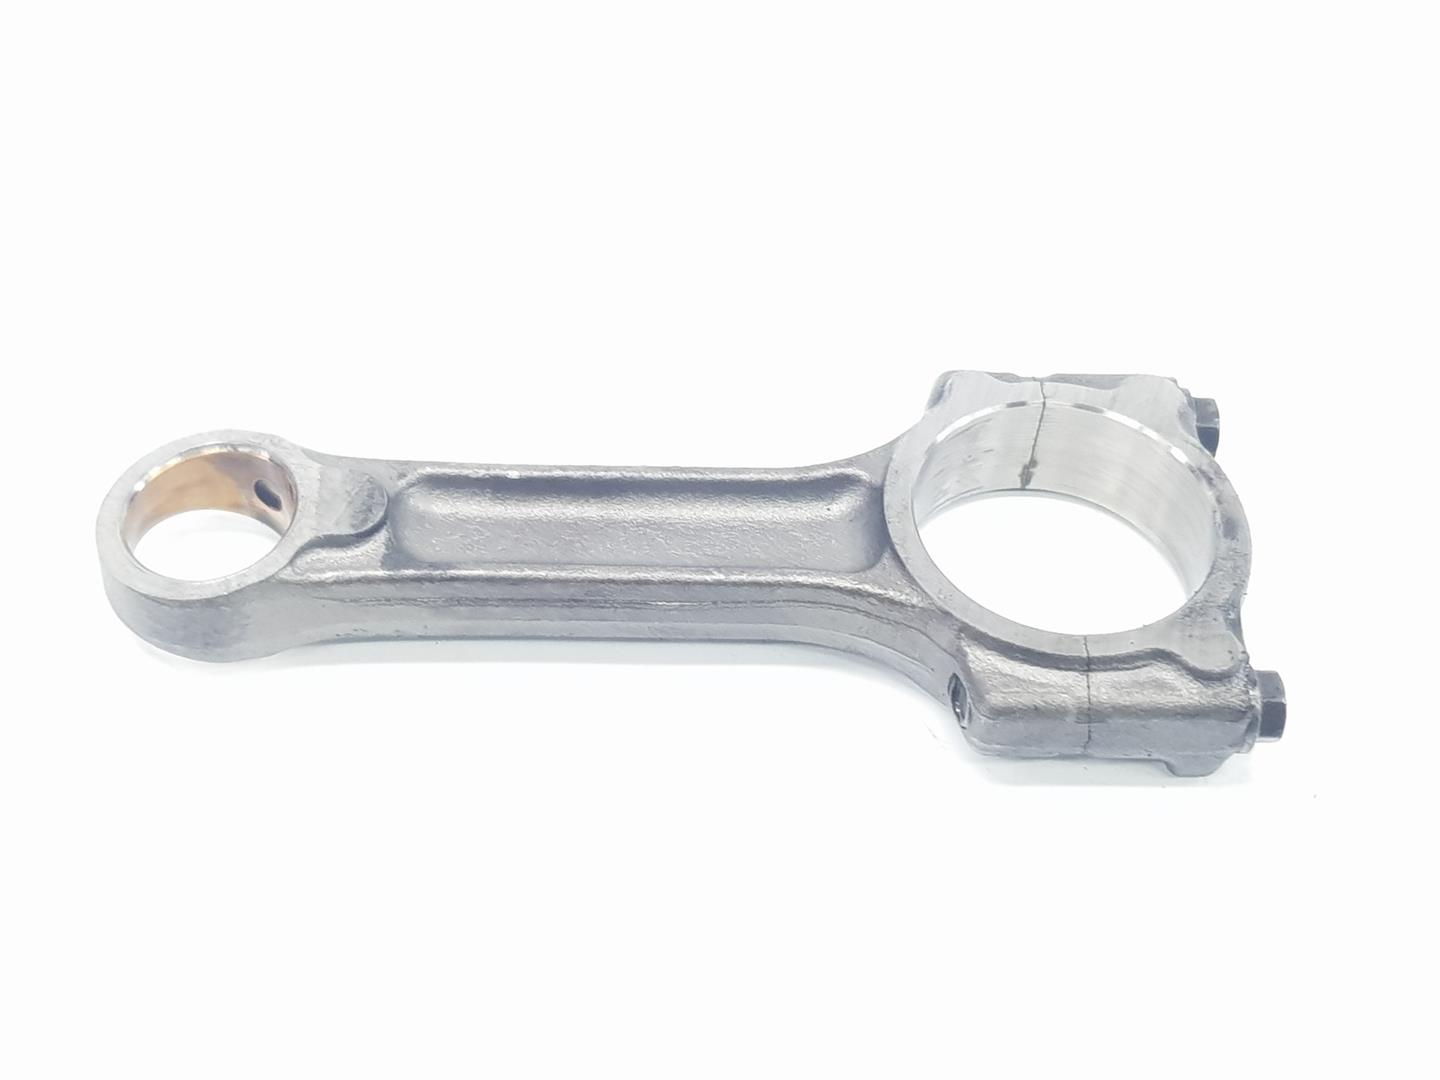 DACIA Duster 1 generation (2010-2017) Connecting Rod 7701475074, 7701475074, 1111AA 24676101